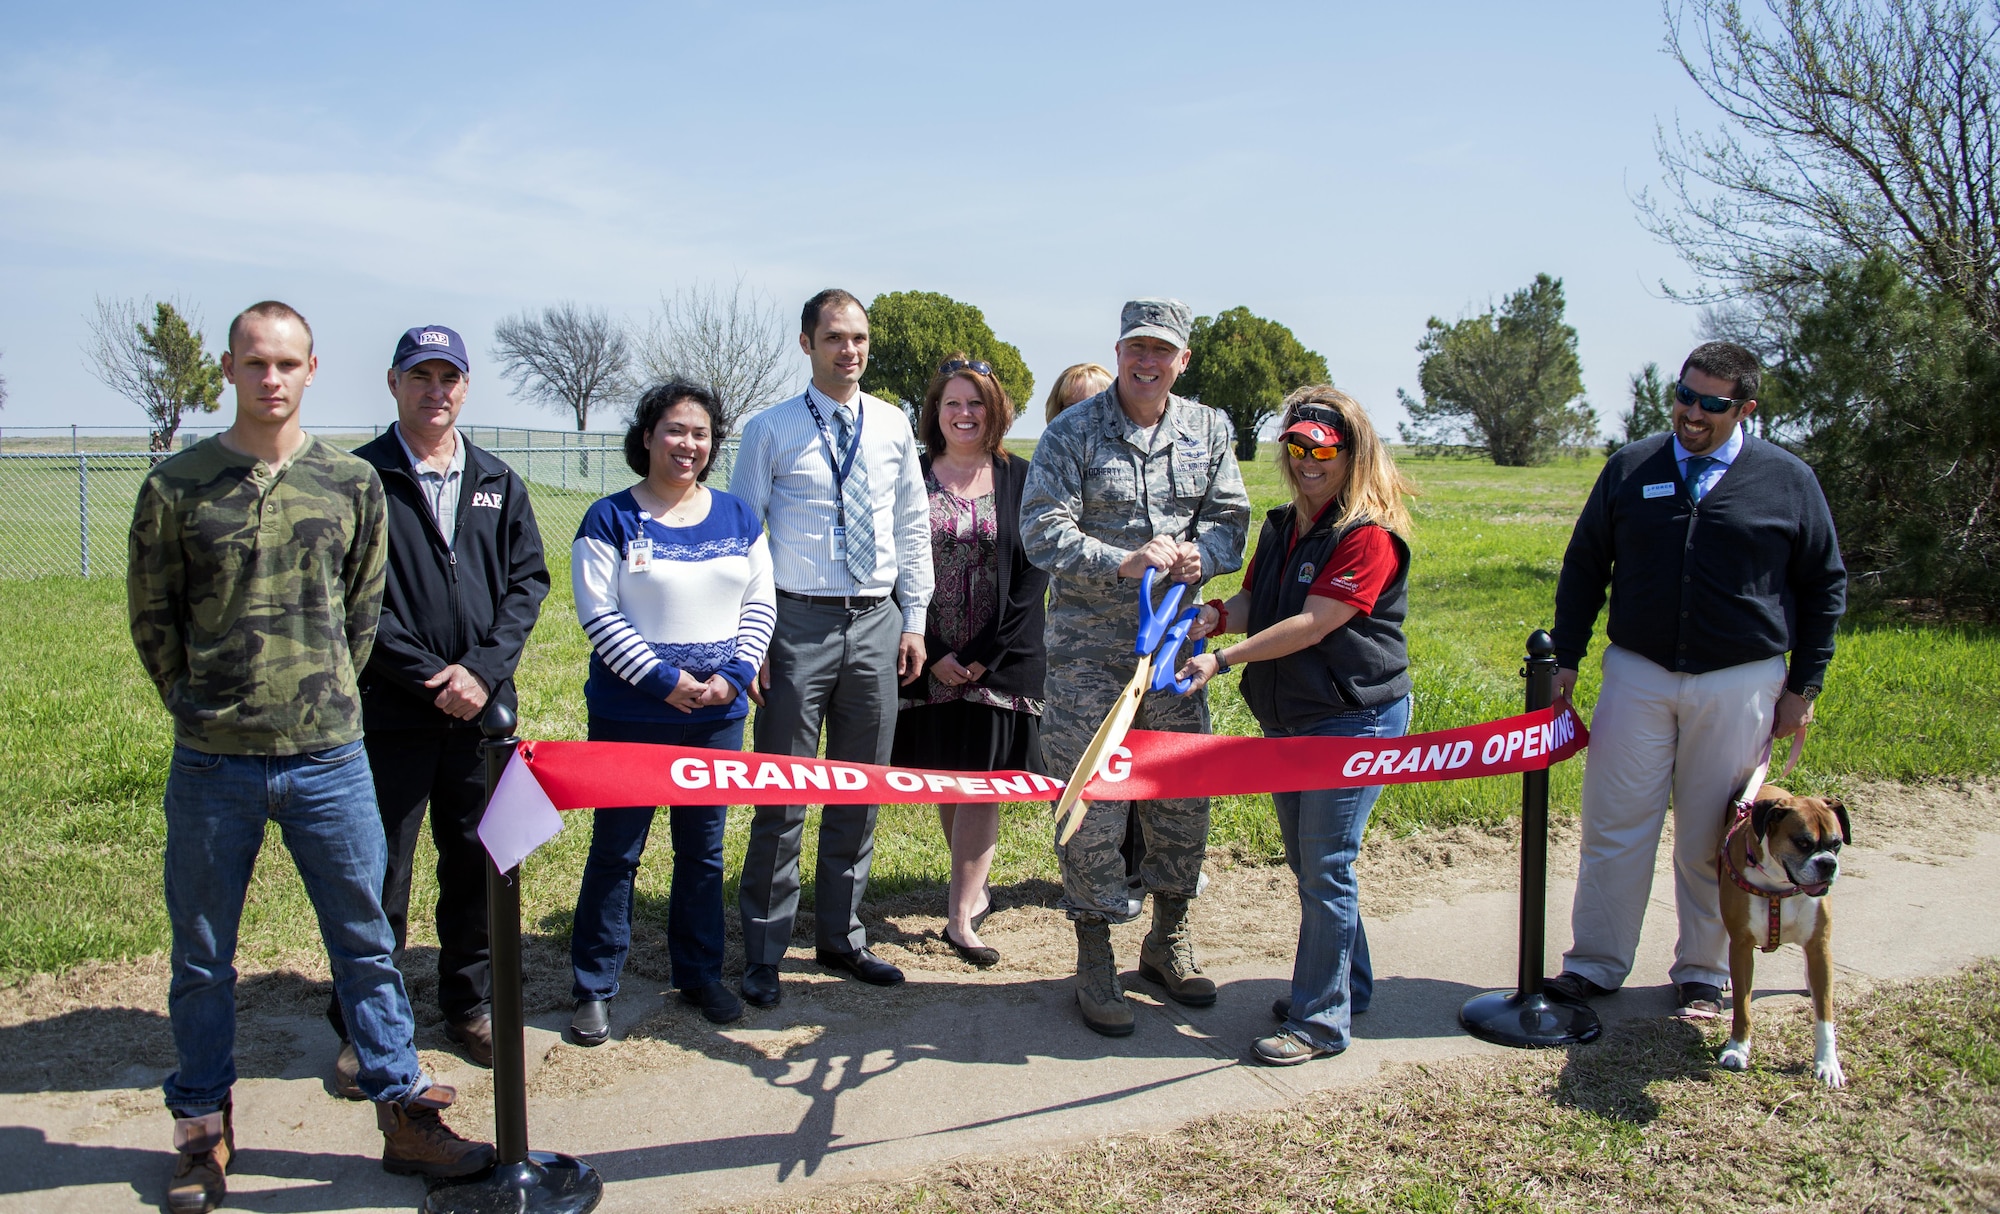 Brig. Gen. Patrick Doherty, 82nd Training Wing commander, along with Elizabeth Clements, Outdoor Recreation director, and other members of Team Sheppard, cut the ribbon during the grand reopening of the dog park at Wing Creek Park on Sheppard Air Force Base, Texas, March 15, 2017. (U.S. Air Force photo by Senior Airman Robert L. McIlrath/Released)